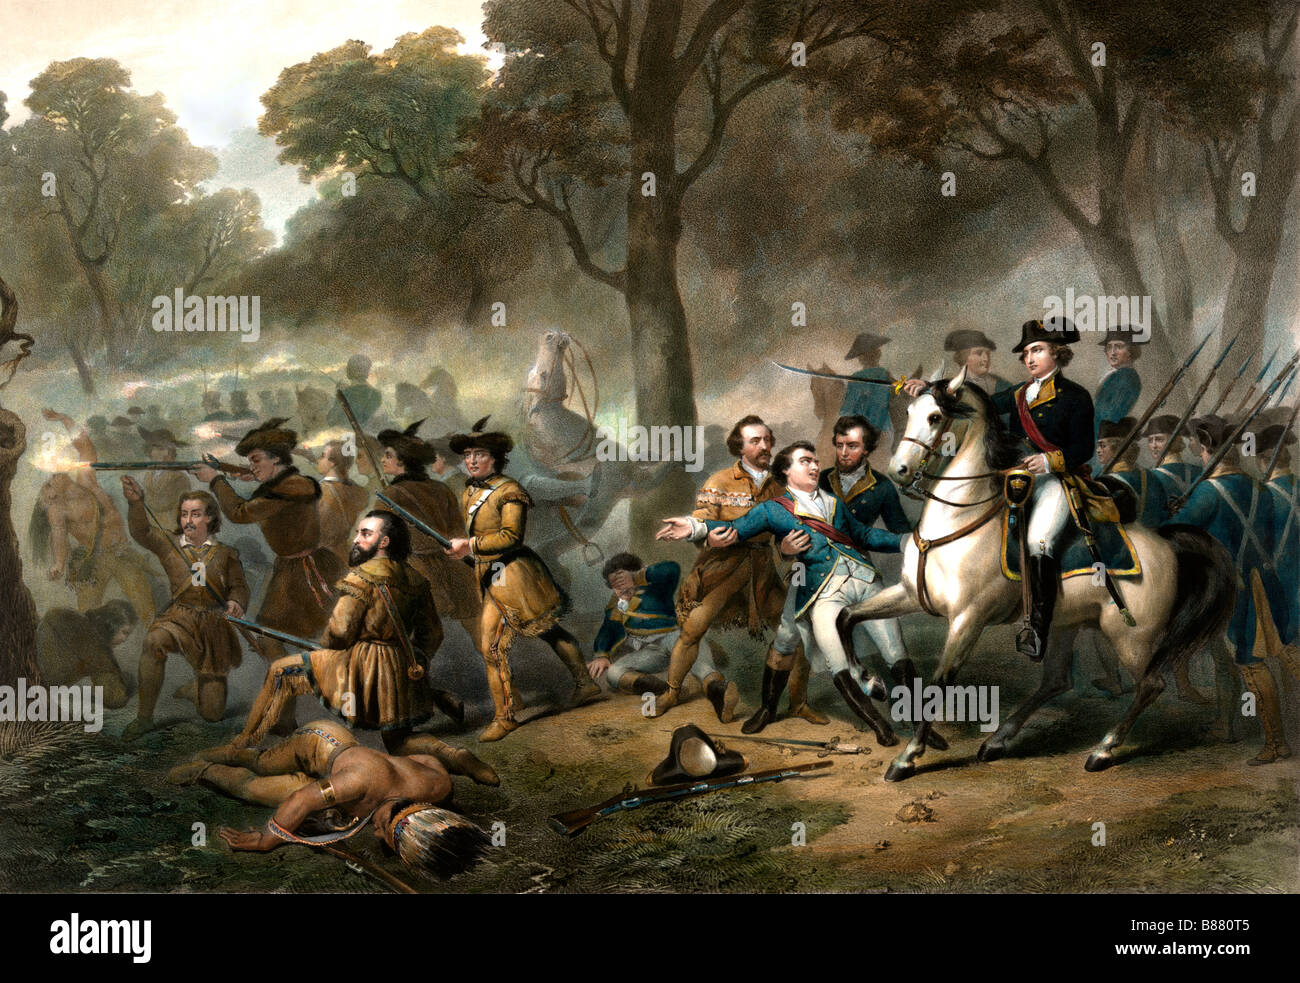 Life of George Washington - The Soldier.  George Washington on horse, soldiers fighting during the battle of the Monongahela Stock Photo